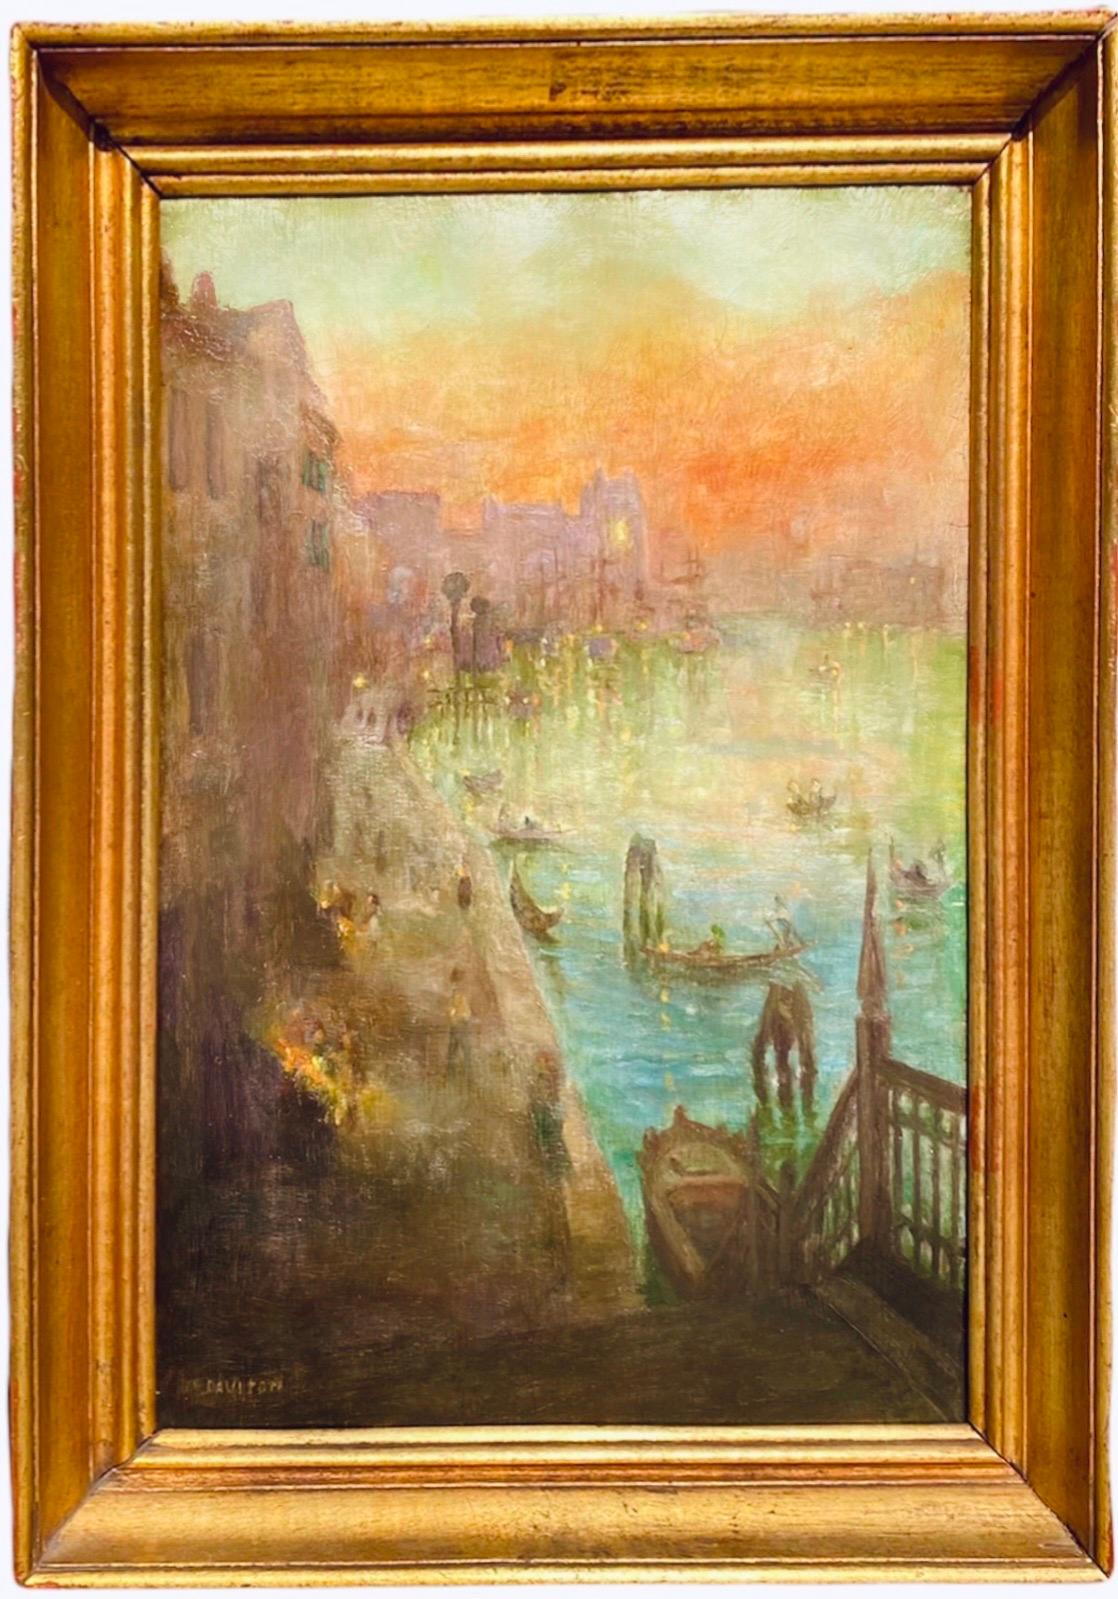 Unknown Figurative Painting - 19th century impressionist painting - View of Venice - Sunset Canal Capriccio